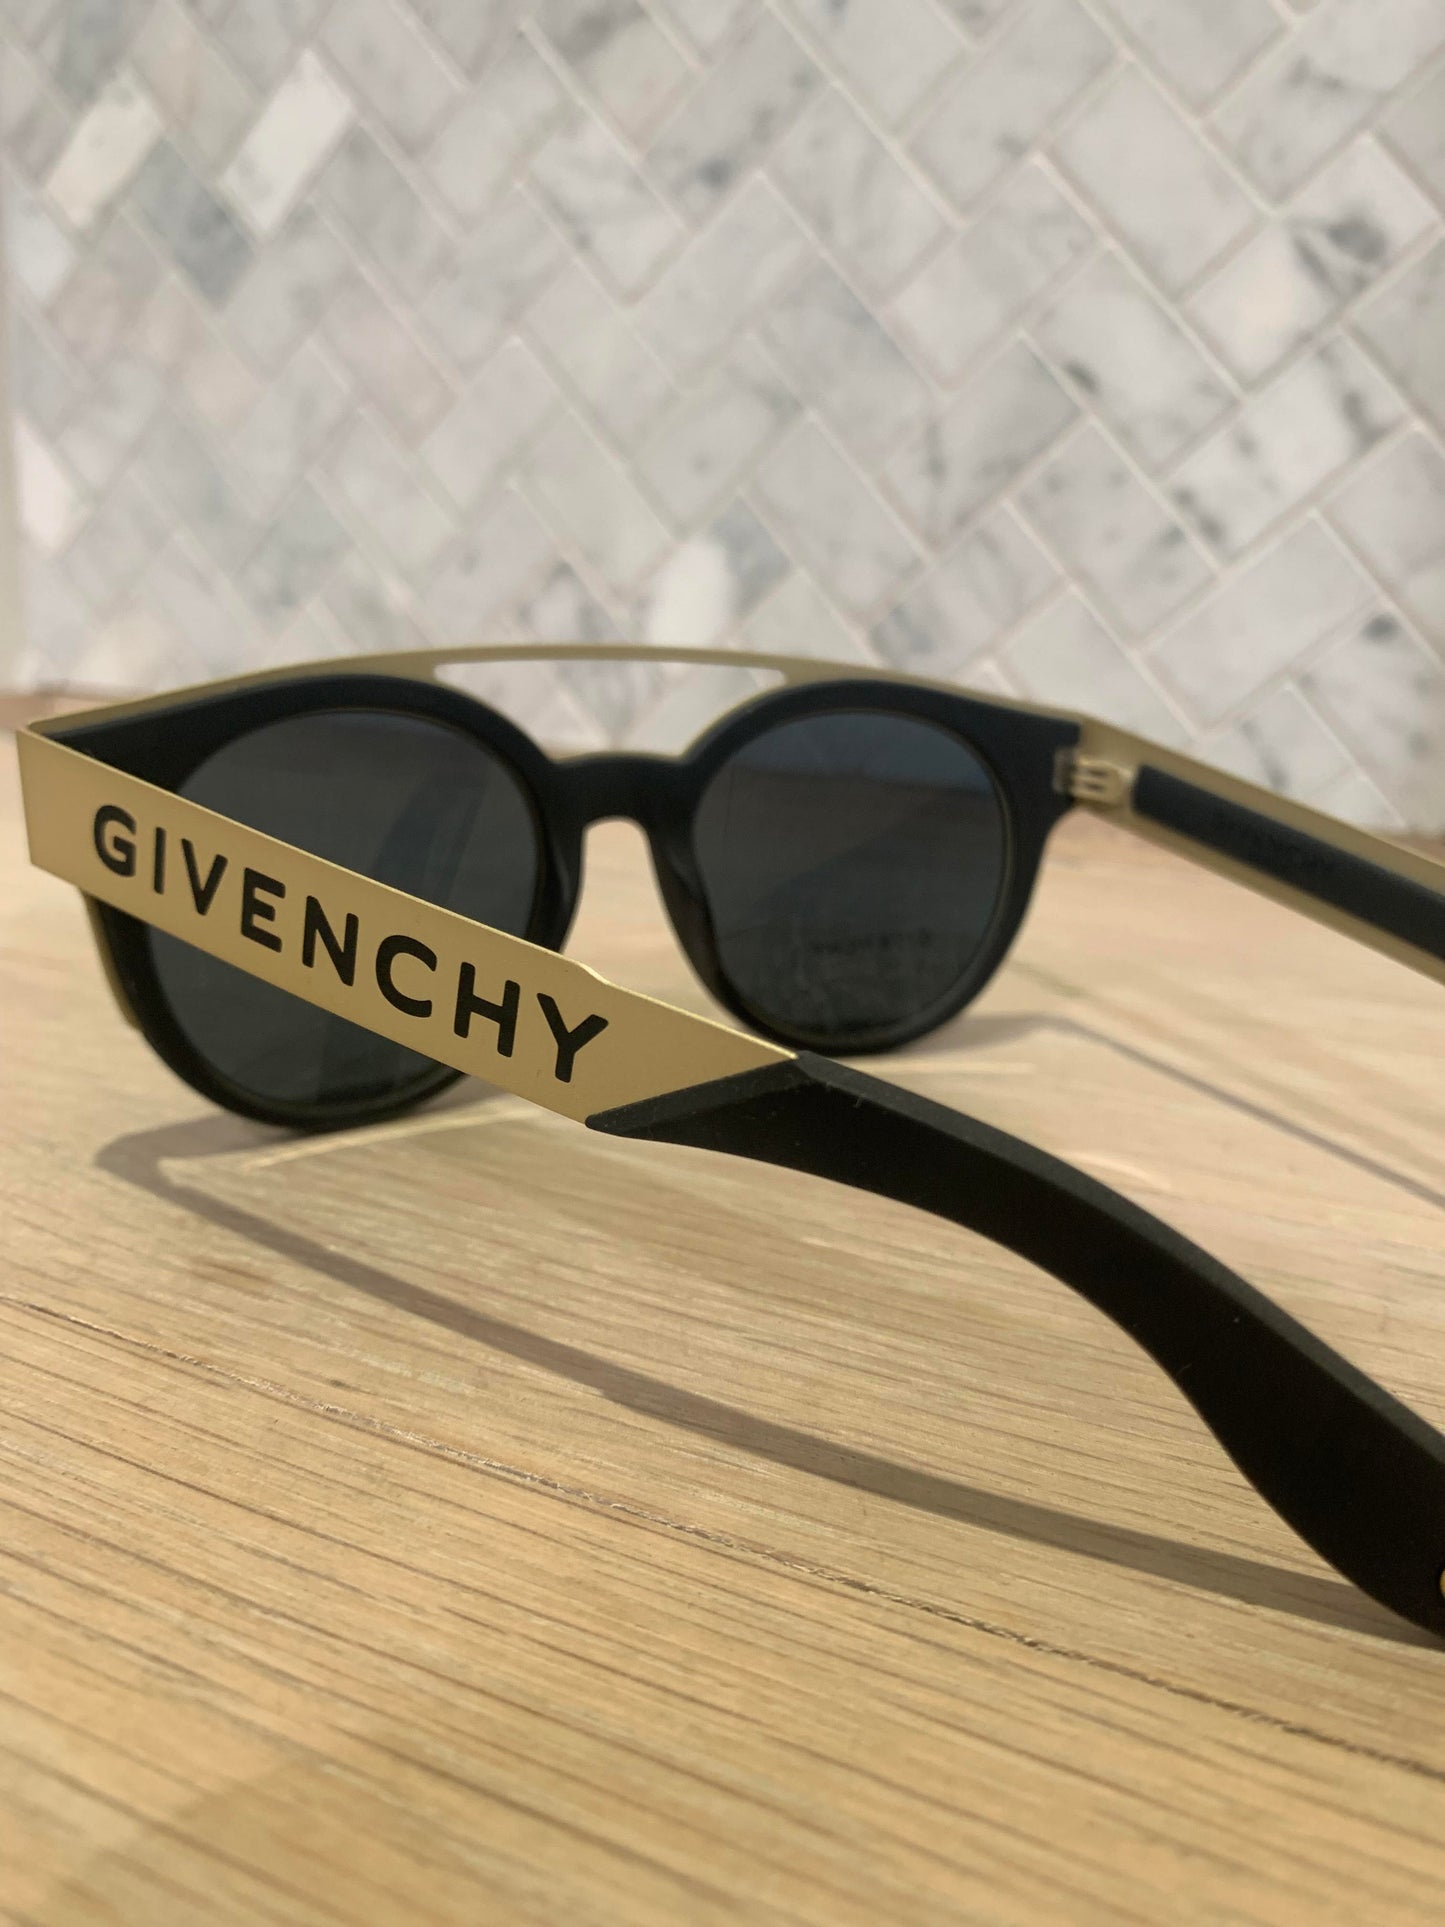 GIVENCHY - SUNGLASSES - ROUND